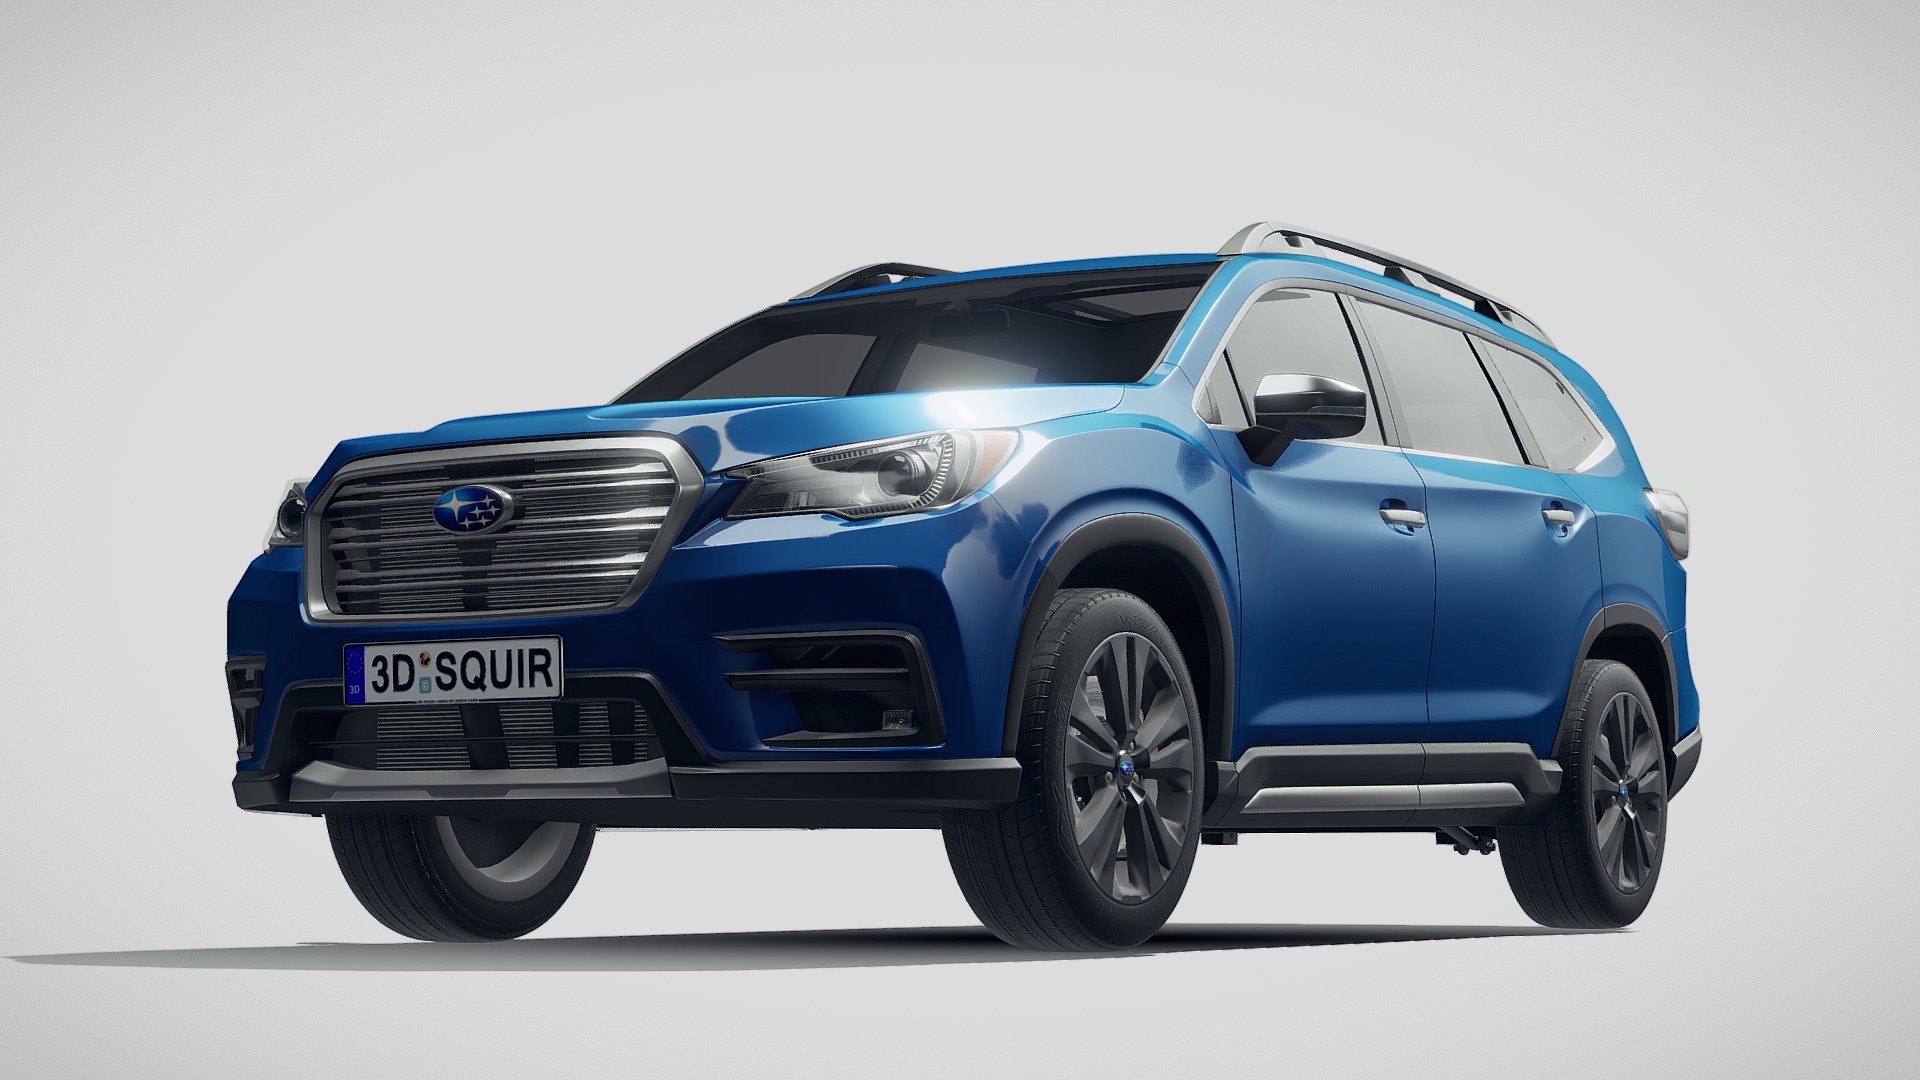 3D model Subaru Ascent 2019 - This is a 3D model of the Subaru Ascent 2019. The 3D model is about a blue car with a white background.